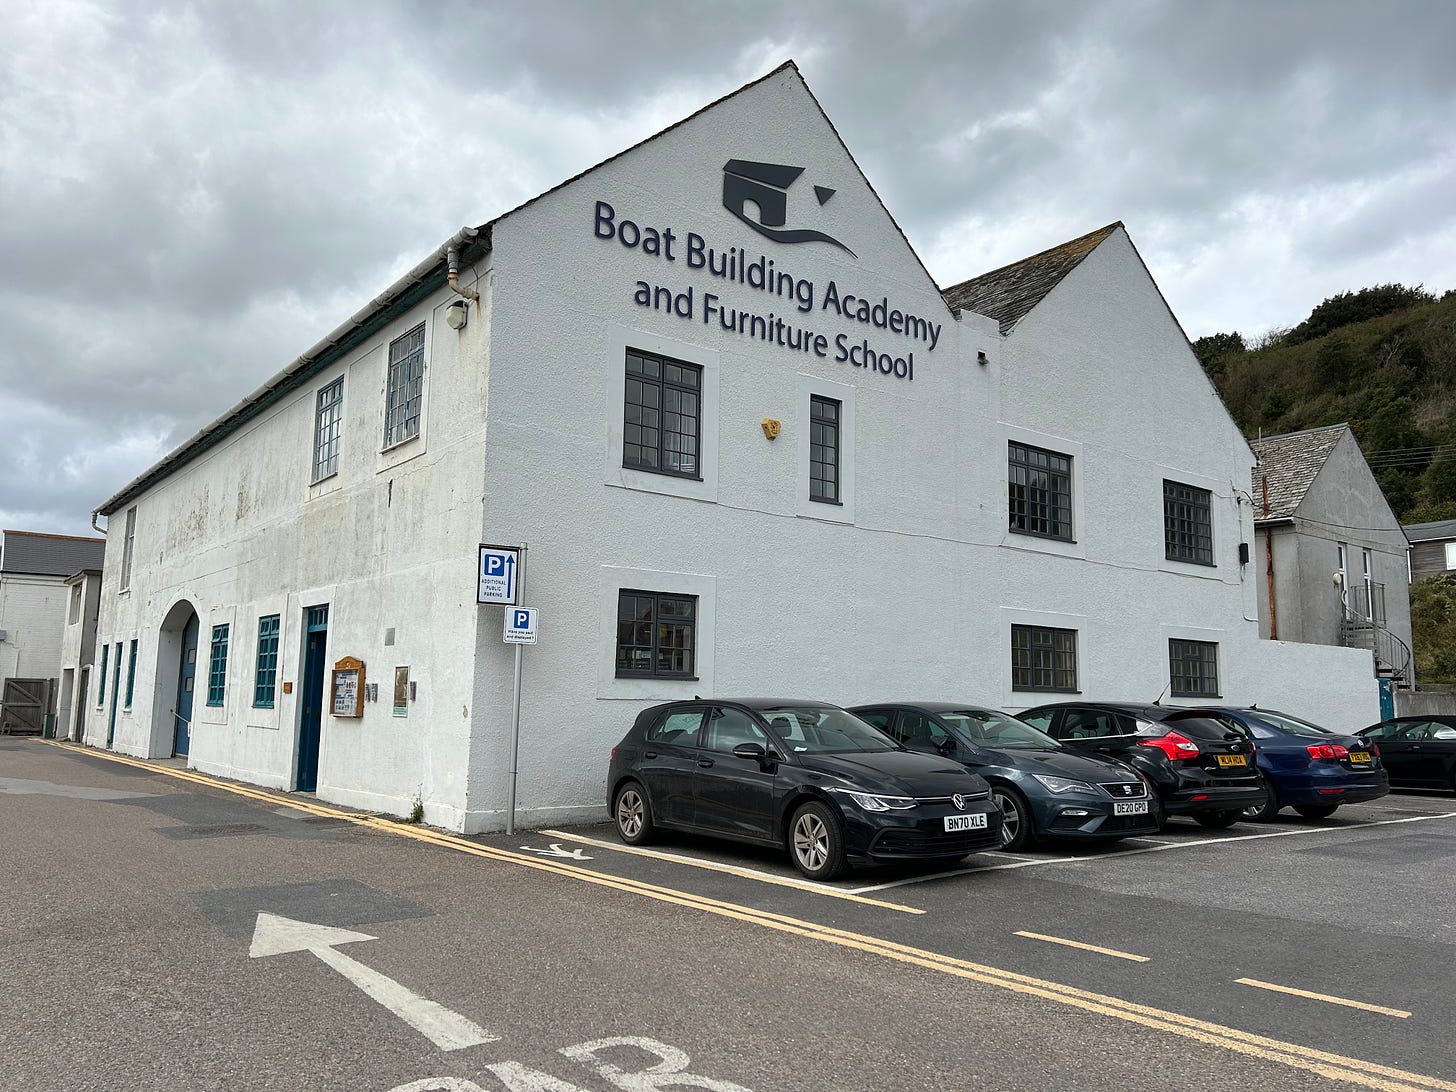 The white building of the Boat Building Academy and Furniture School. Image: Roland's Travelsand 